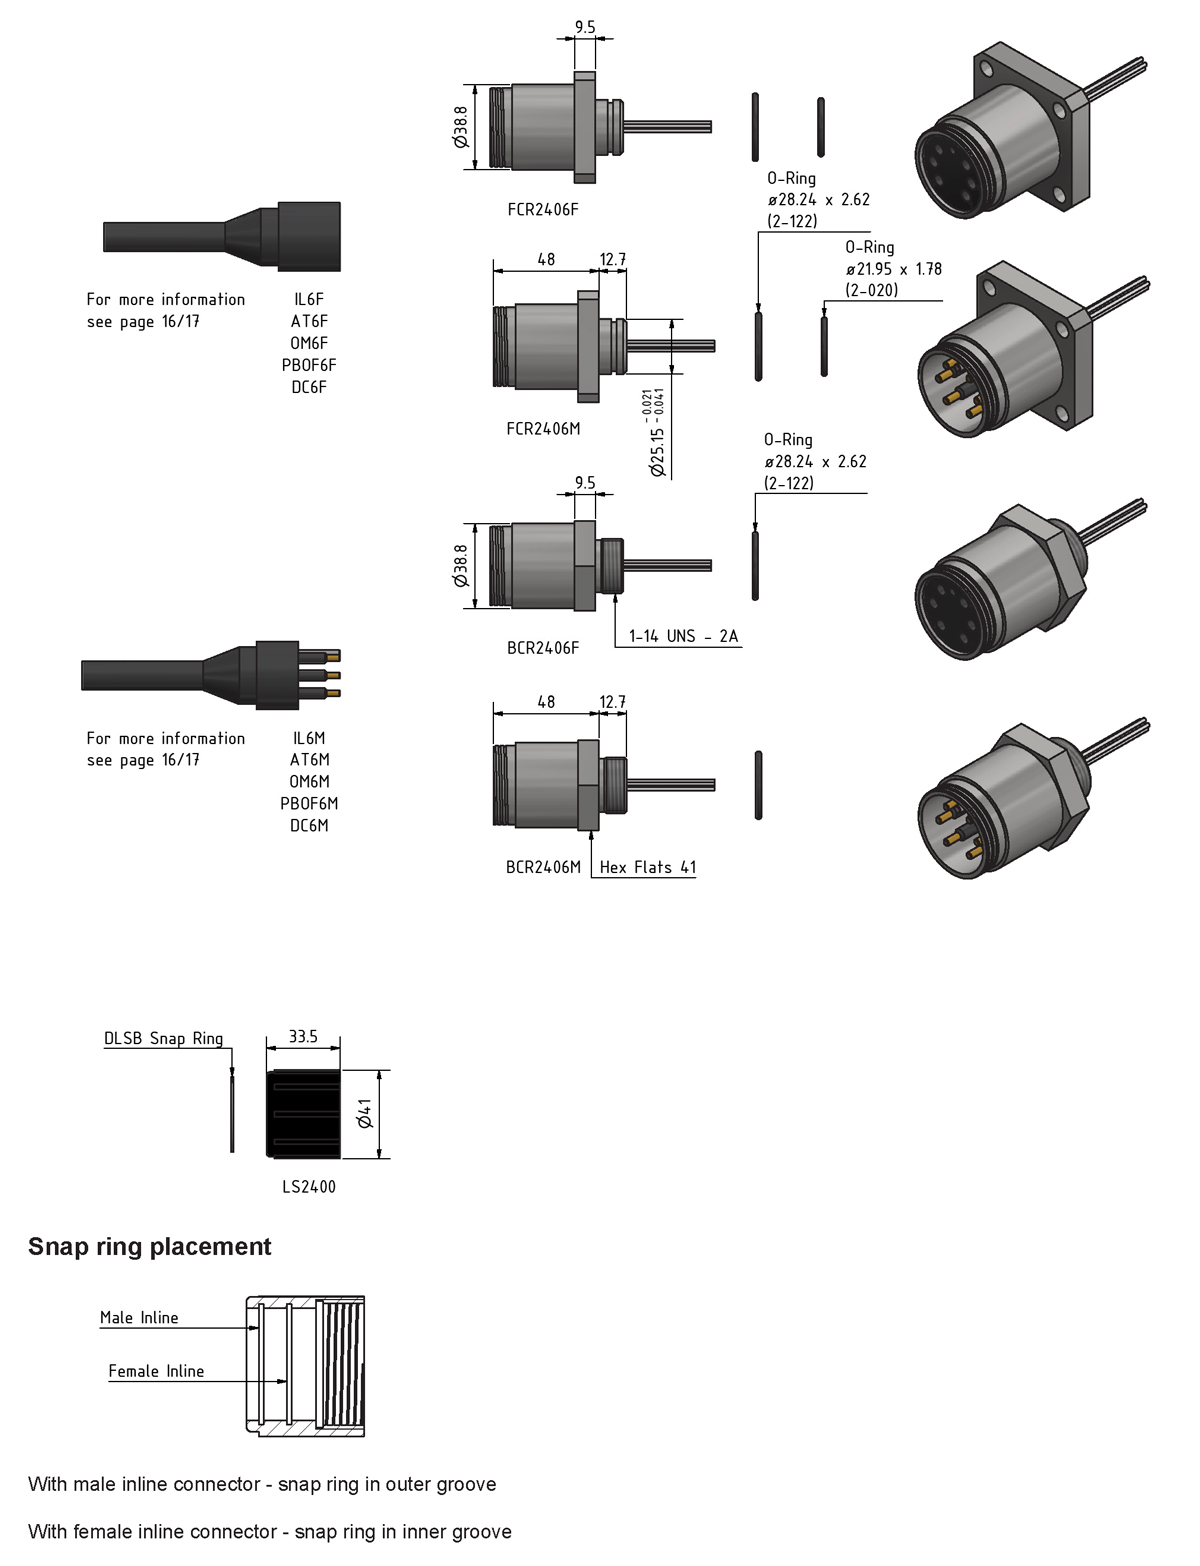 subconn metal shell 2400 series connector drawings